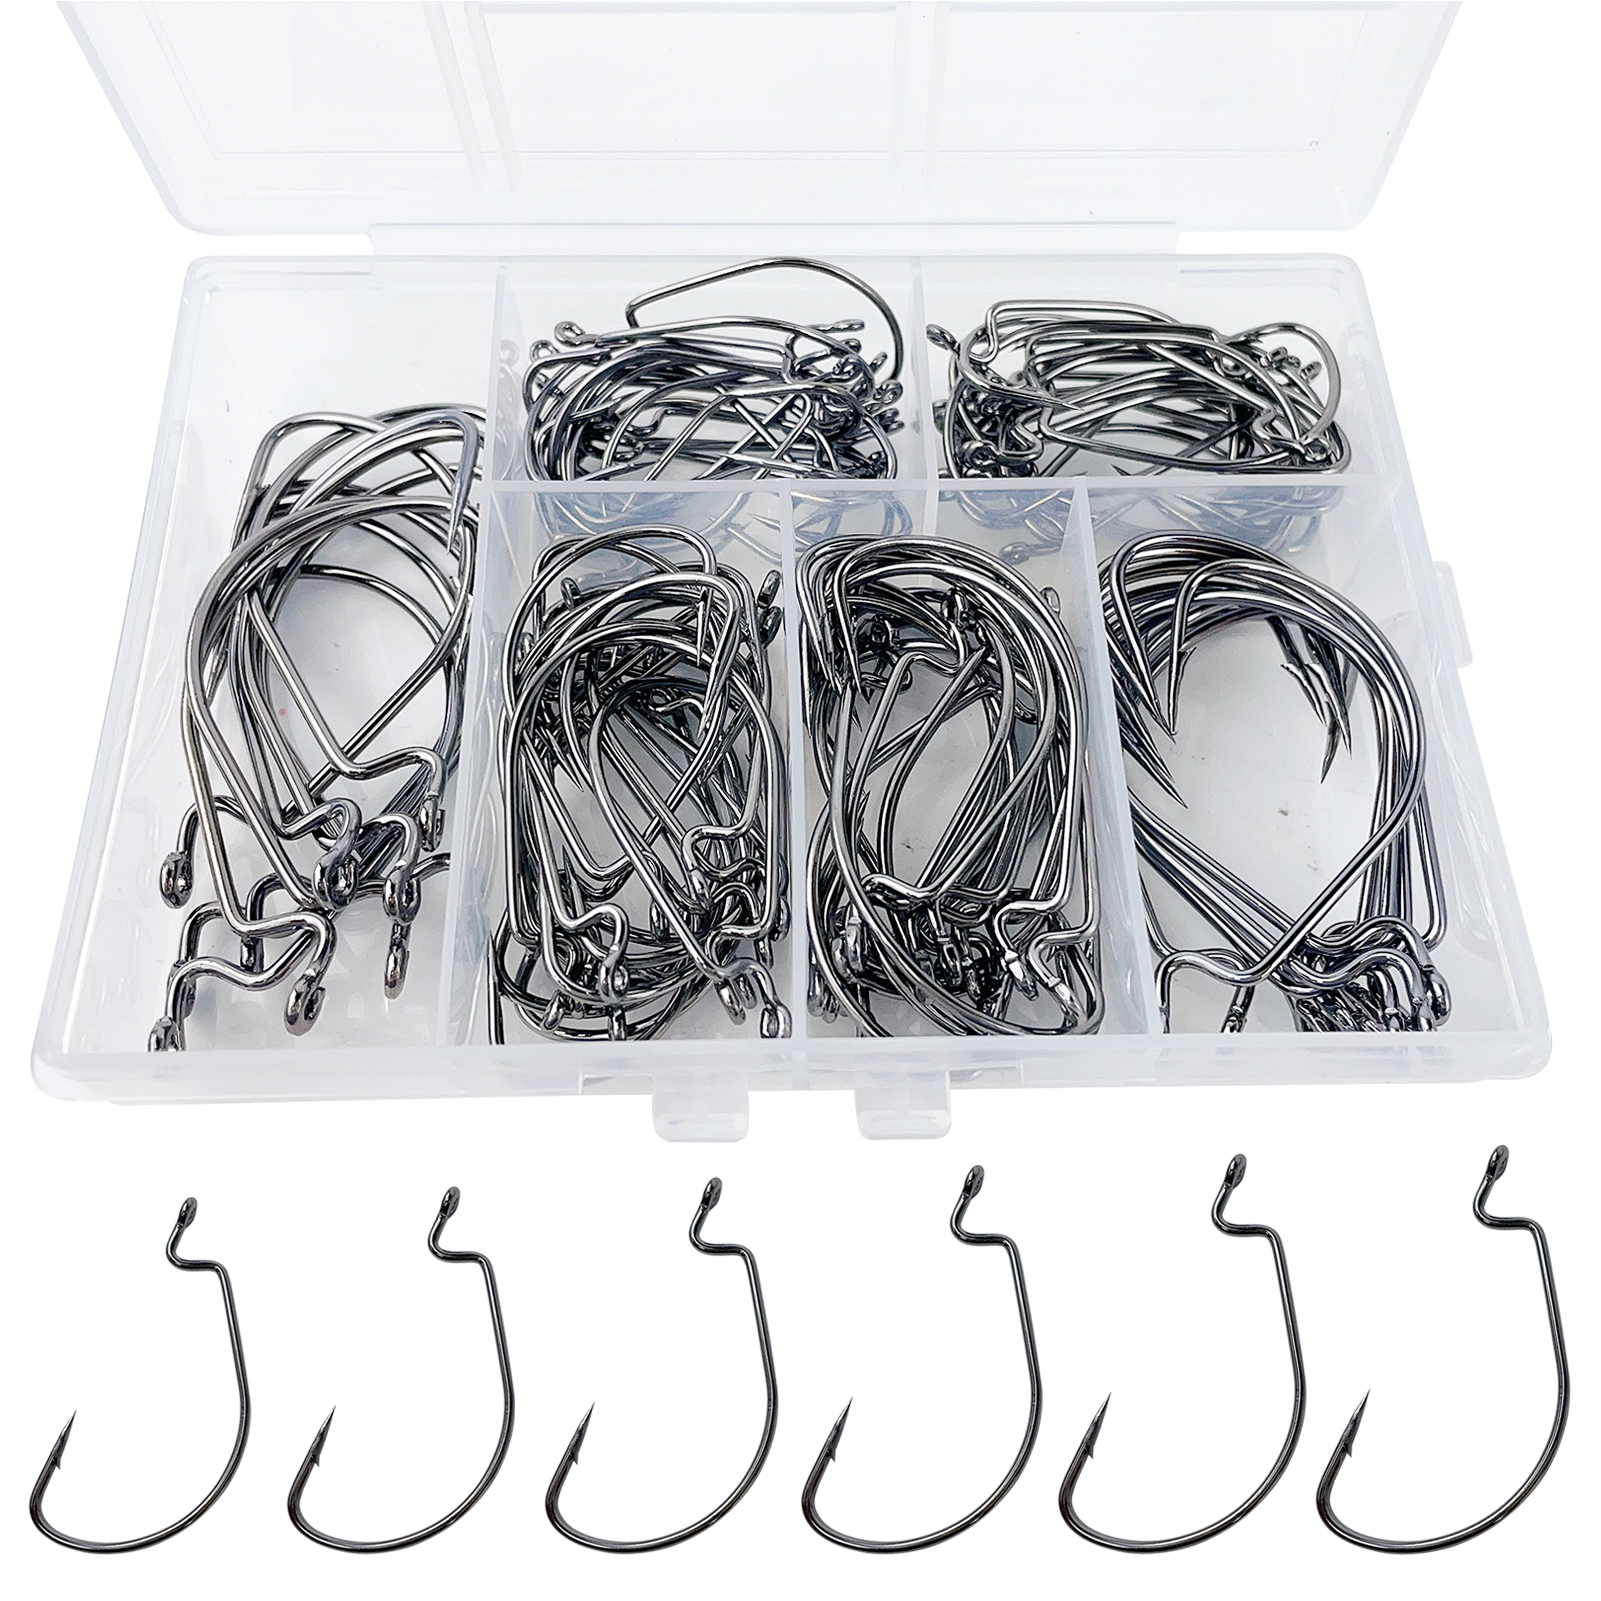 FREE FISHER 101pcs Fishing Crank Hooks Kit High Carbon Steel Worm X-Strong Black Fishhook1#-5/0# Fishing Tackle Box for Freshwater/Saltwater